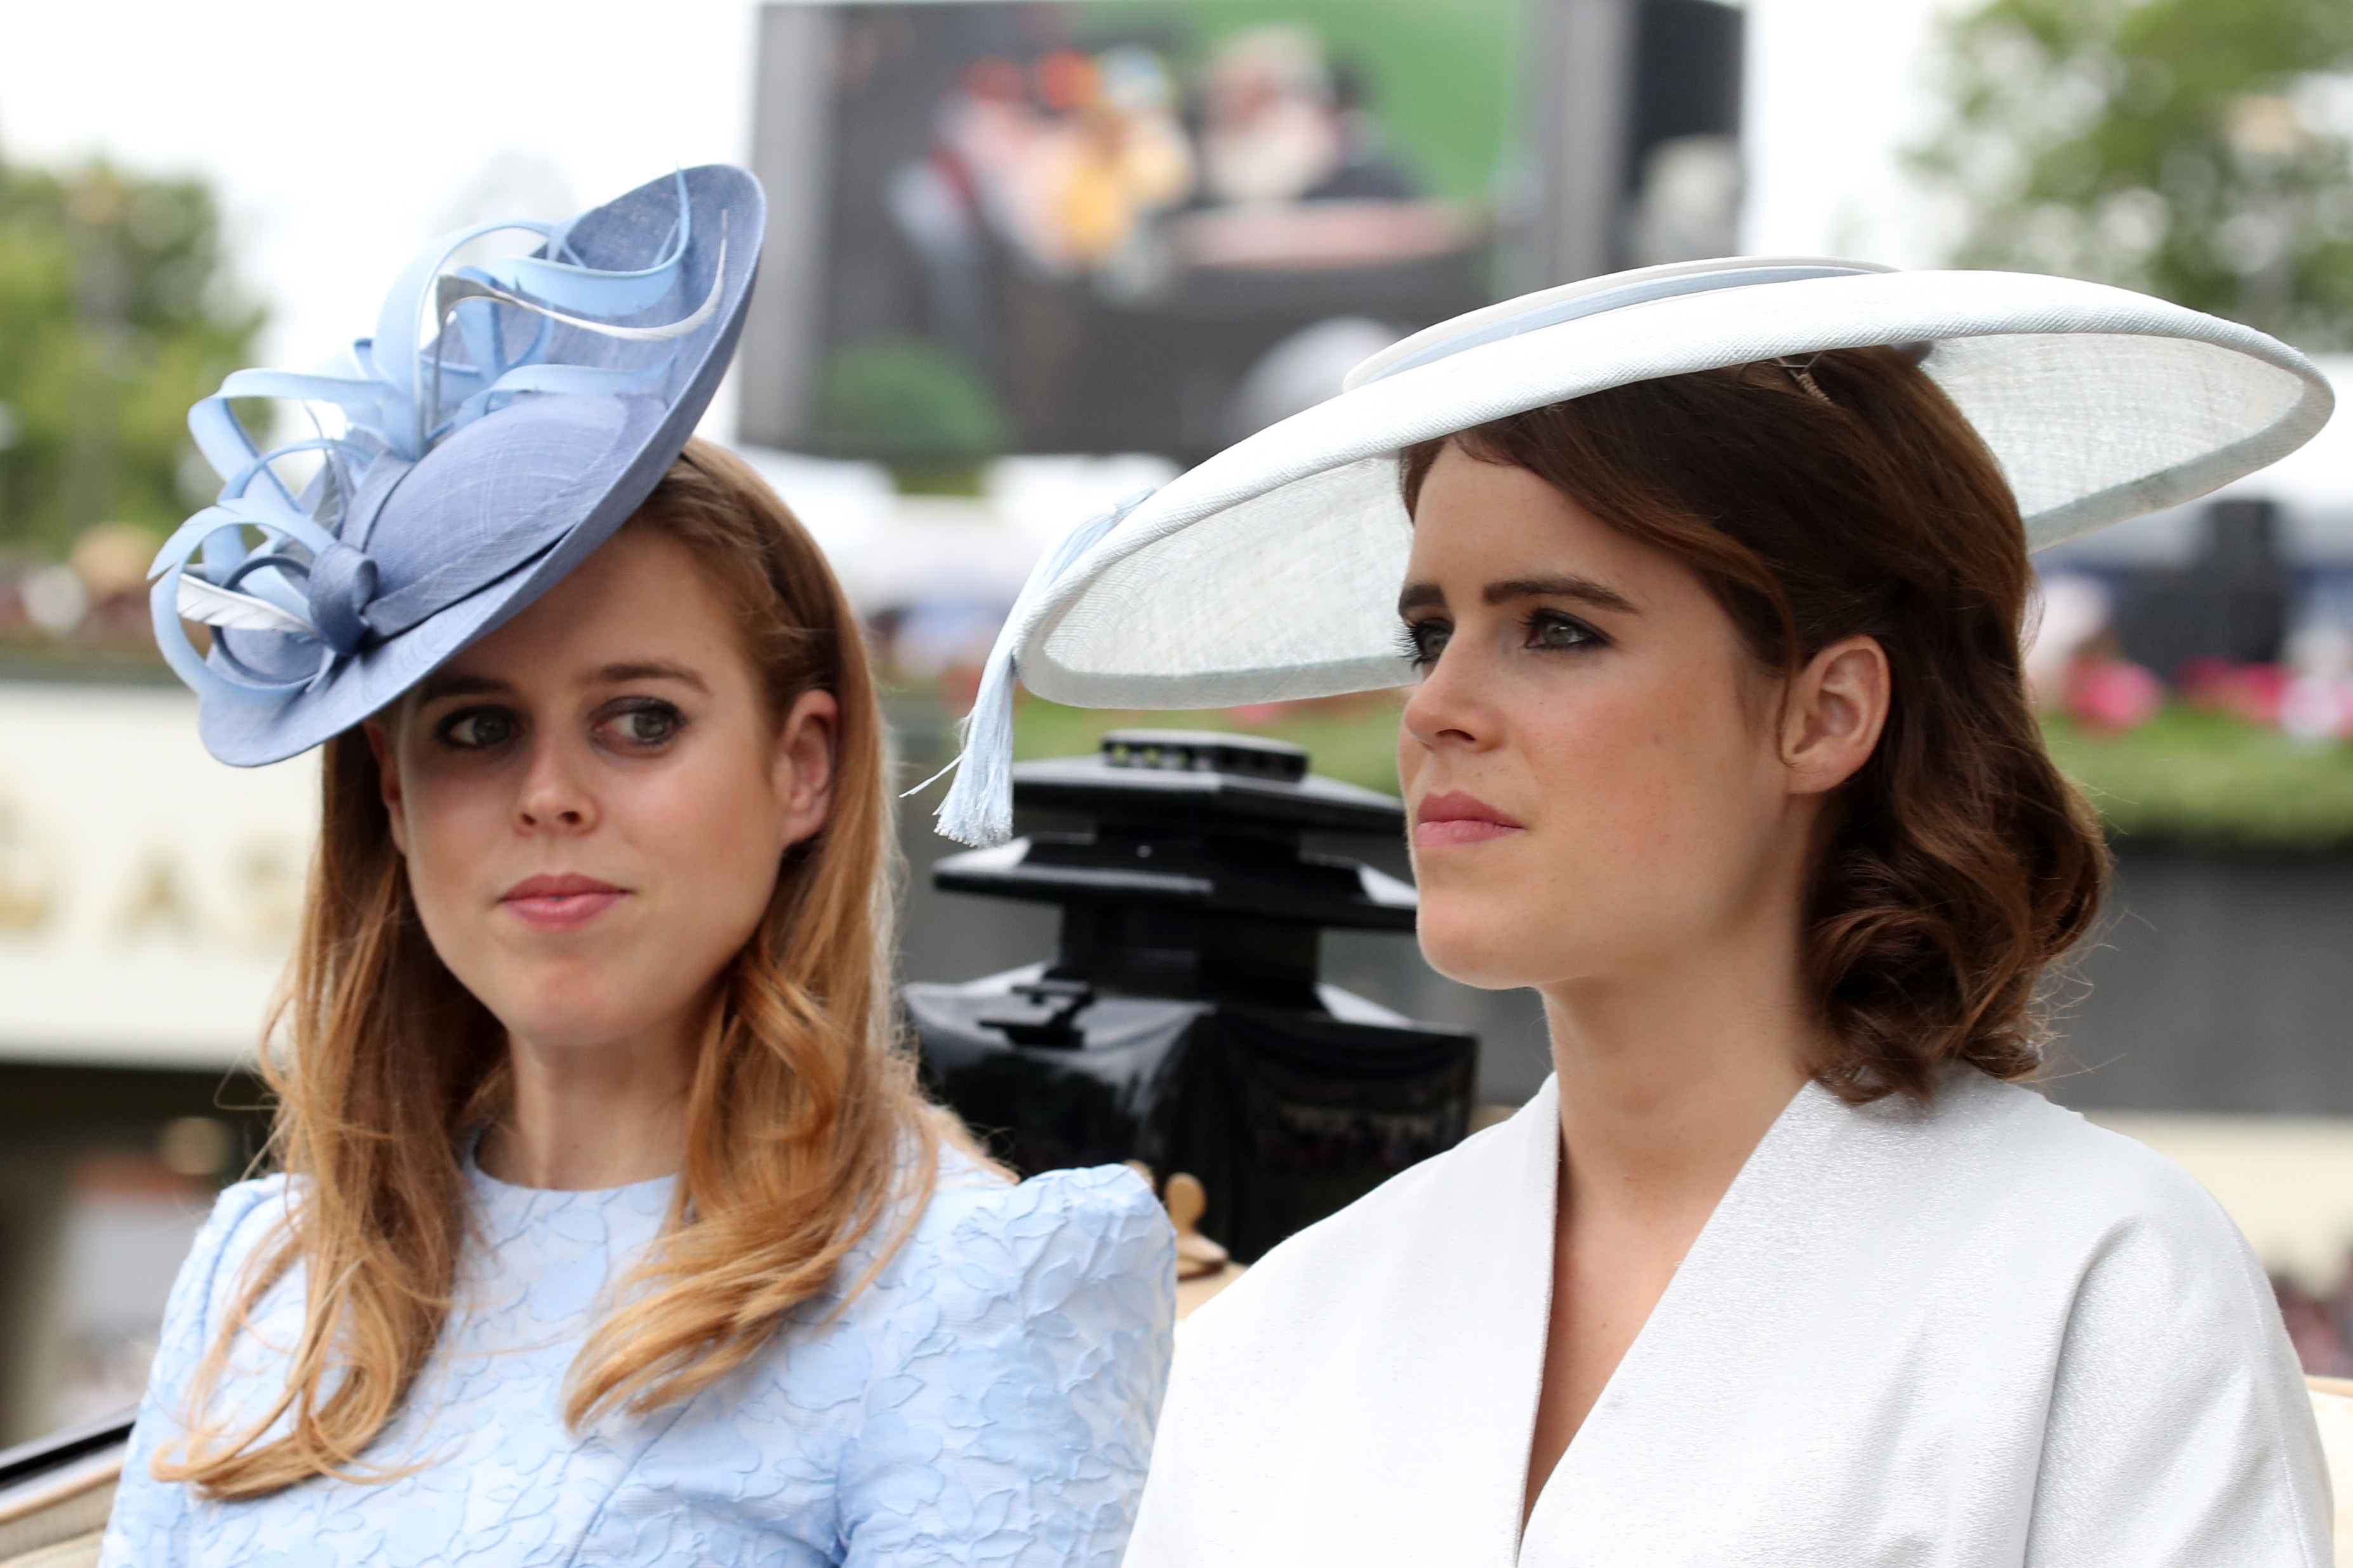 Princess Beatrice and Princess Eugenie attend Royal Ascot Day 1 in 2018.